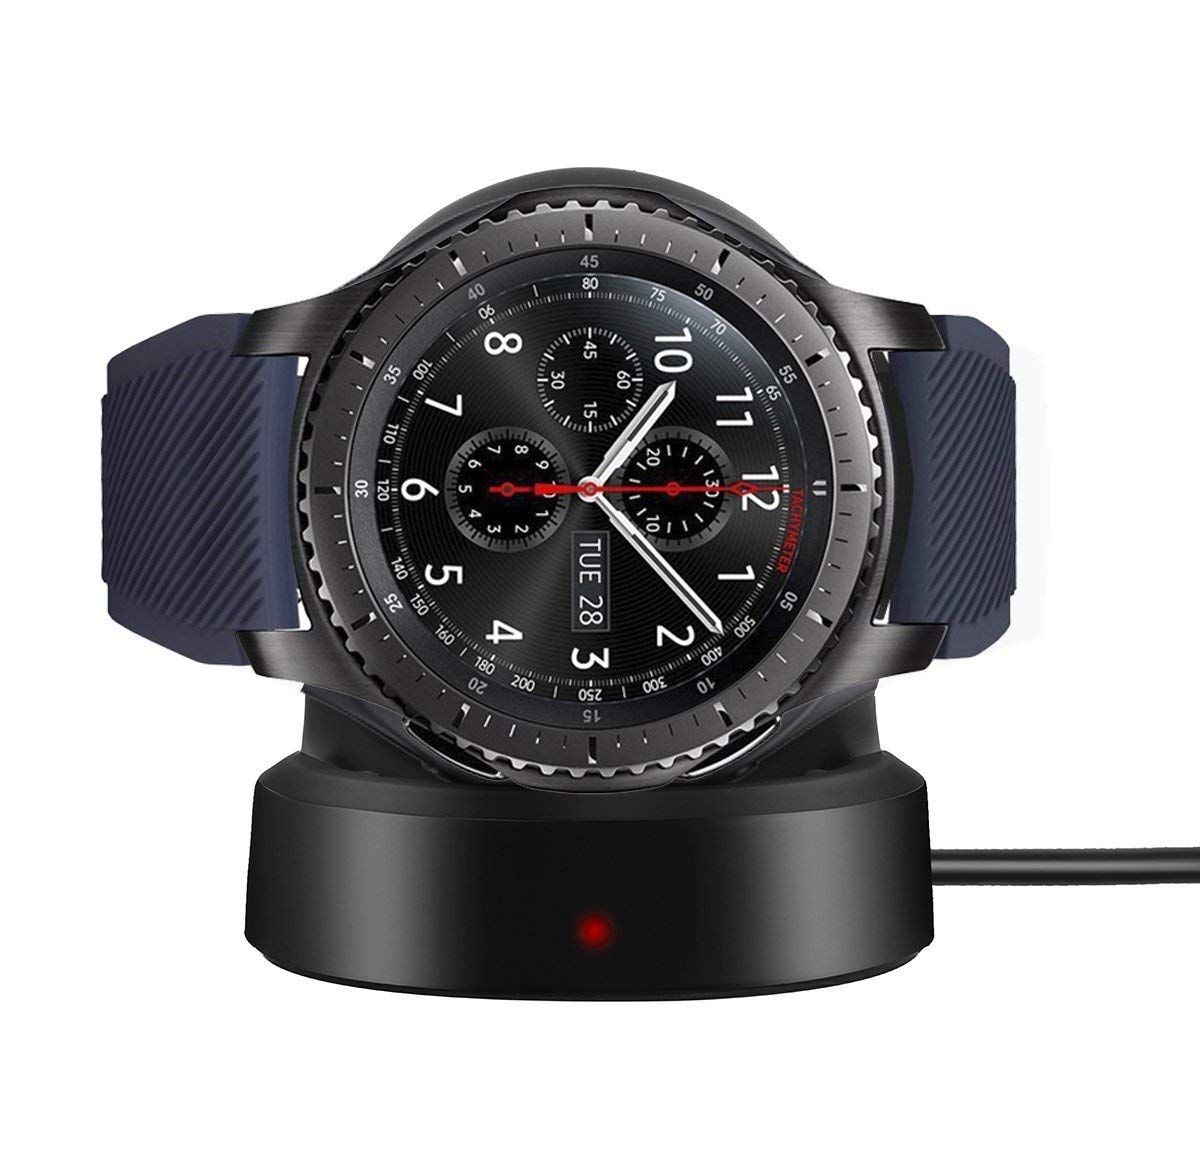 Charger Charging Dock for Samsung Gear S3 | Buy Online in South Africa |  